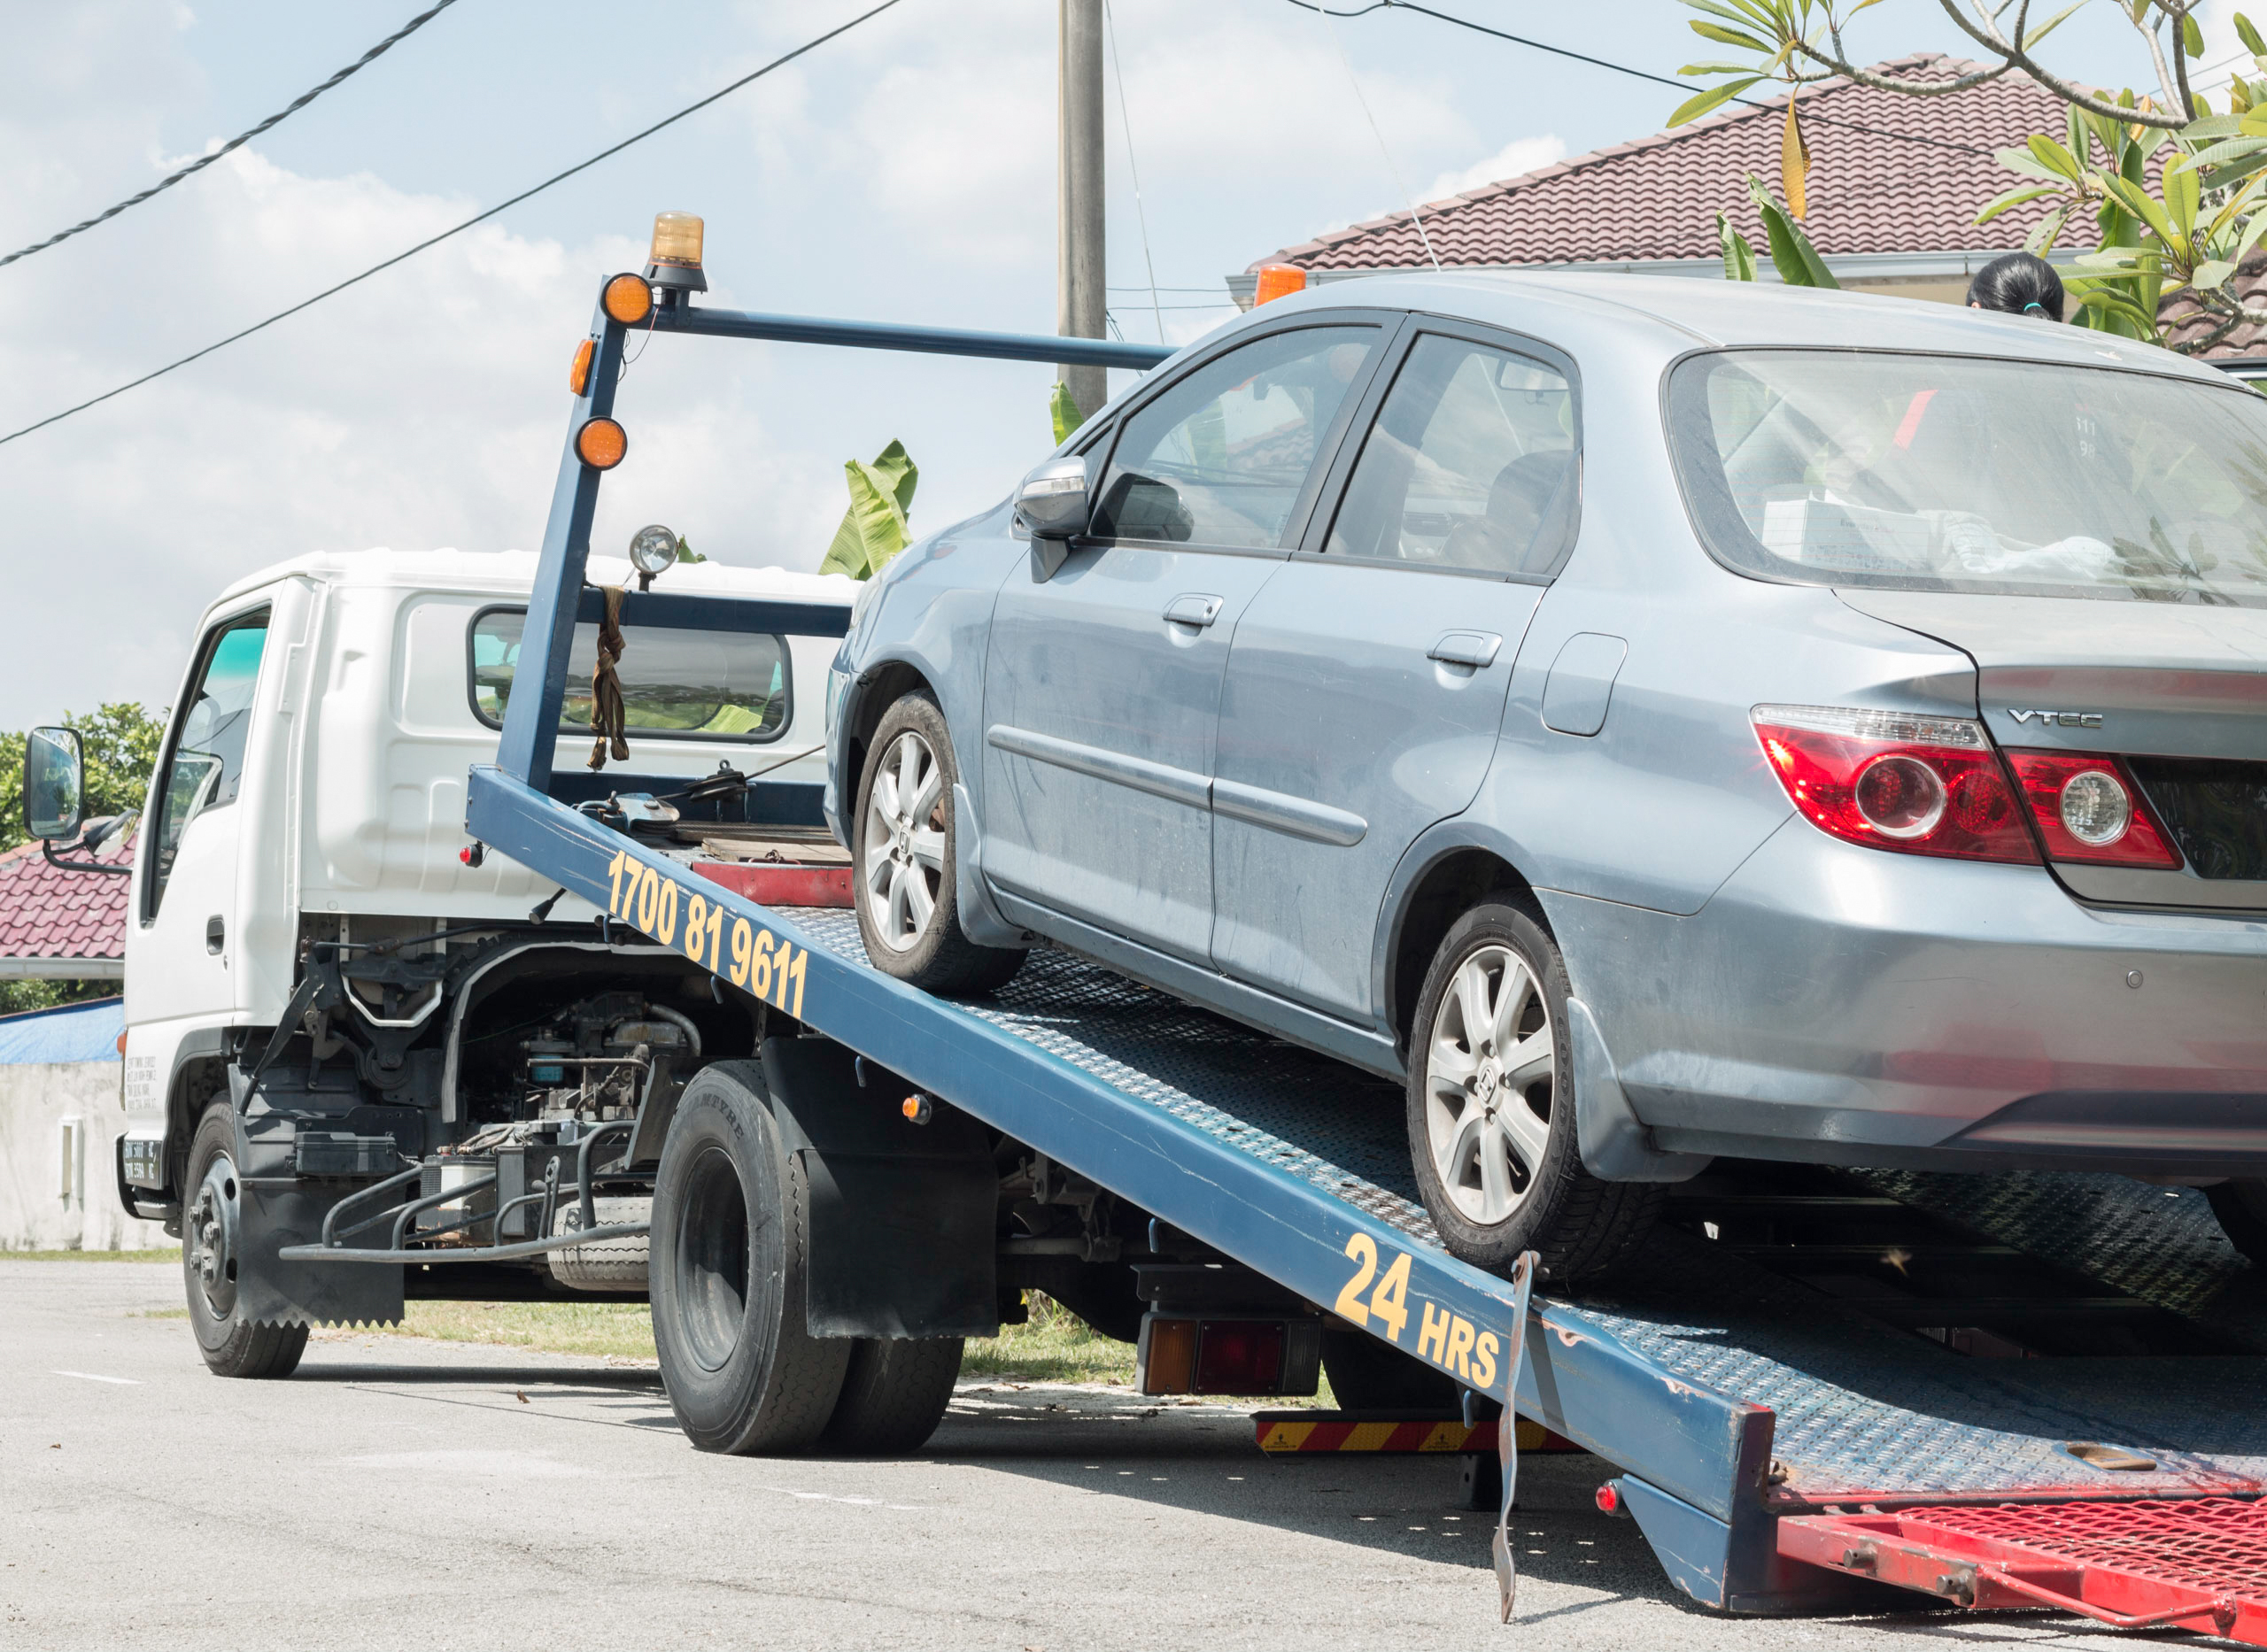 A damaged vehicle being towed away | Source: Shutterstock